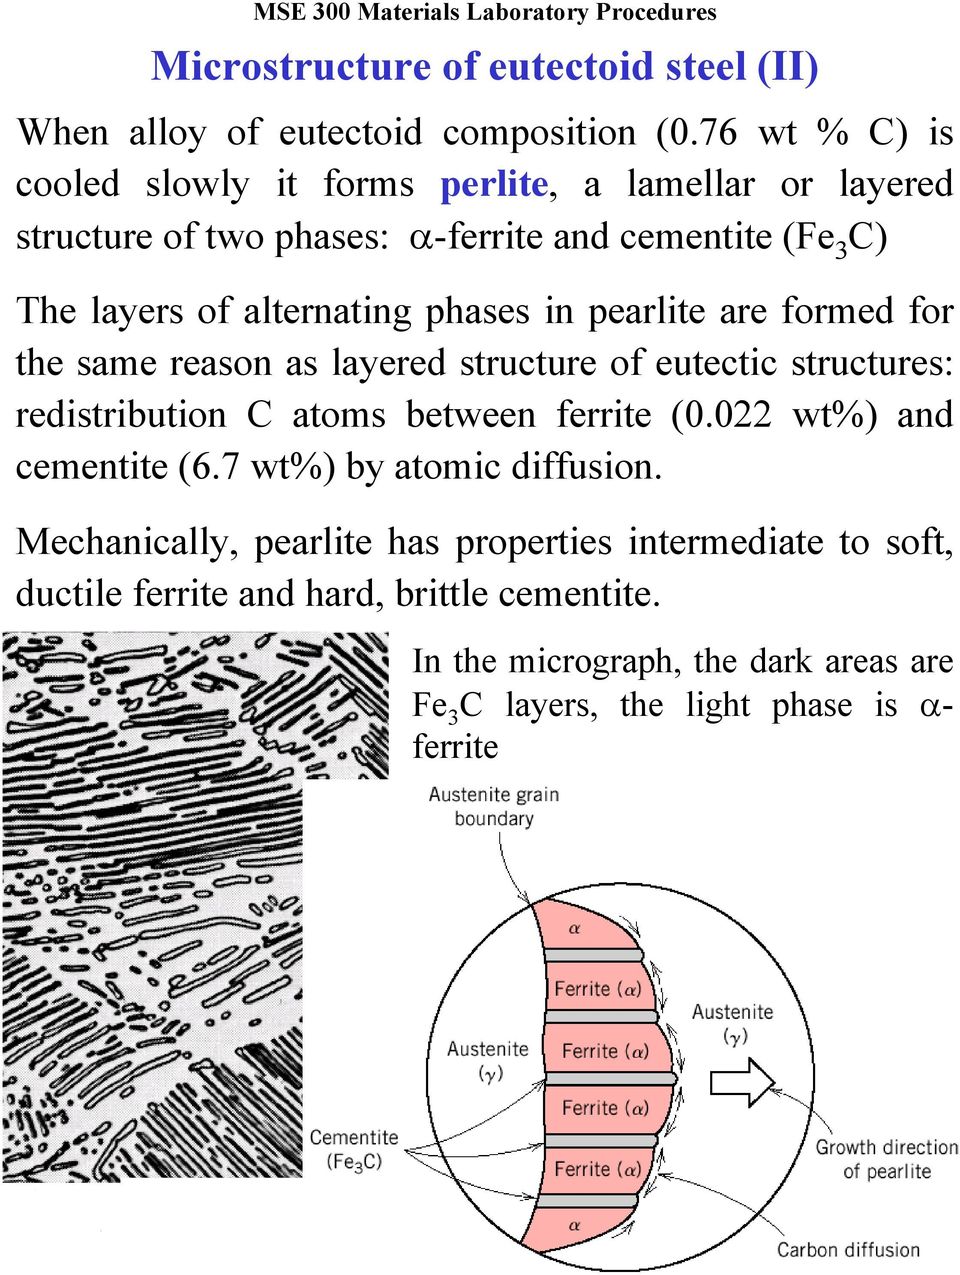 pearlite are formed for the same reason as layered structure of eutectic structures: redistribution C atoms between ferrite (0.022 wt%) and cementite (6.